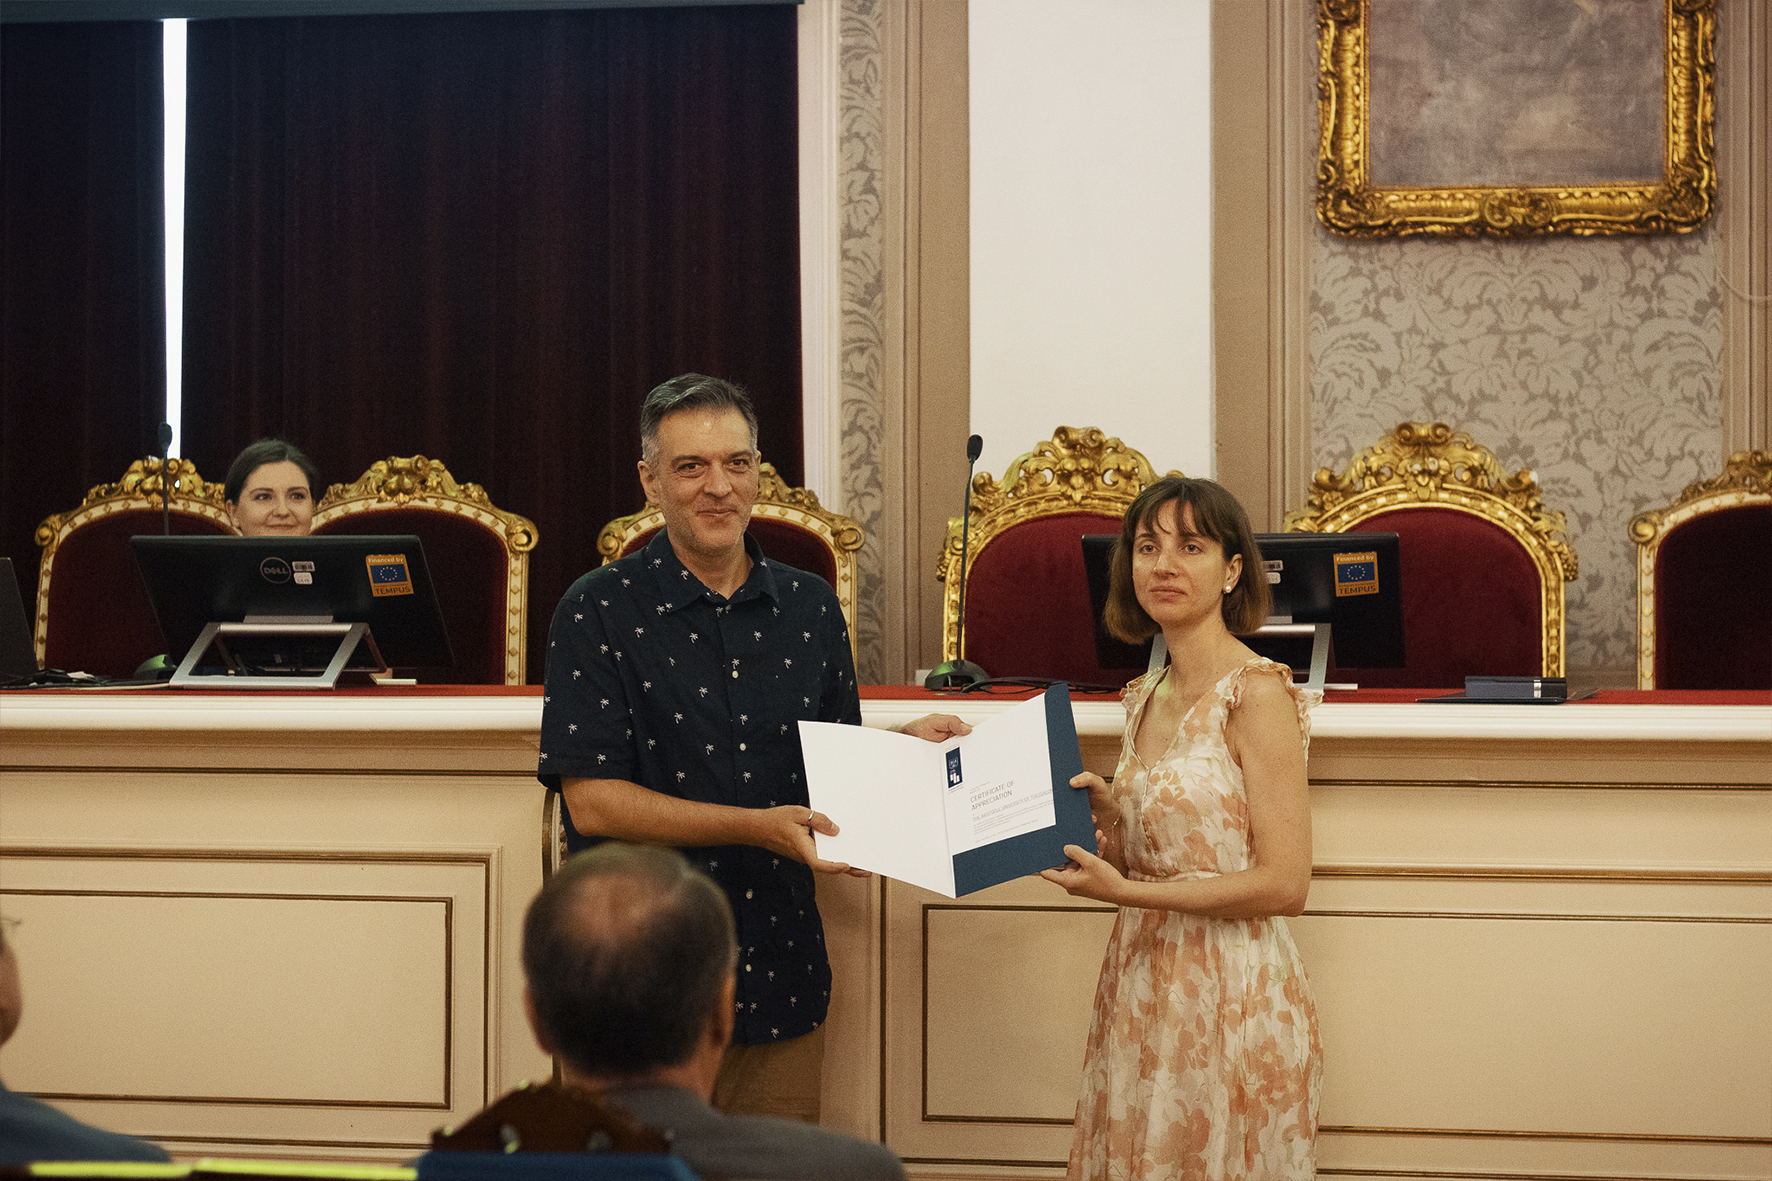 Ms Aikaterini Rapti, Counselor of the Greek Embassy in Belgrade handing out the Certificate of Appreciation to the Aristotle University of Thessaloniki from Greece, received by Prof. Konstantinos Sakantamis, Scientific Coordinator of HERSUS Project for Aristotle University of Thessaloniki.© Marko Miladinović